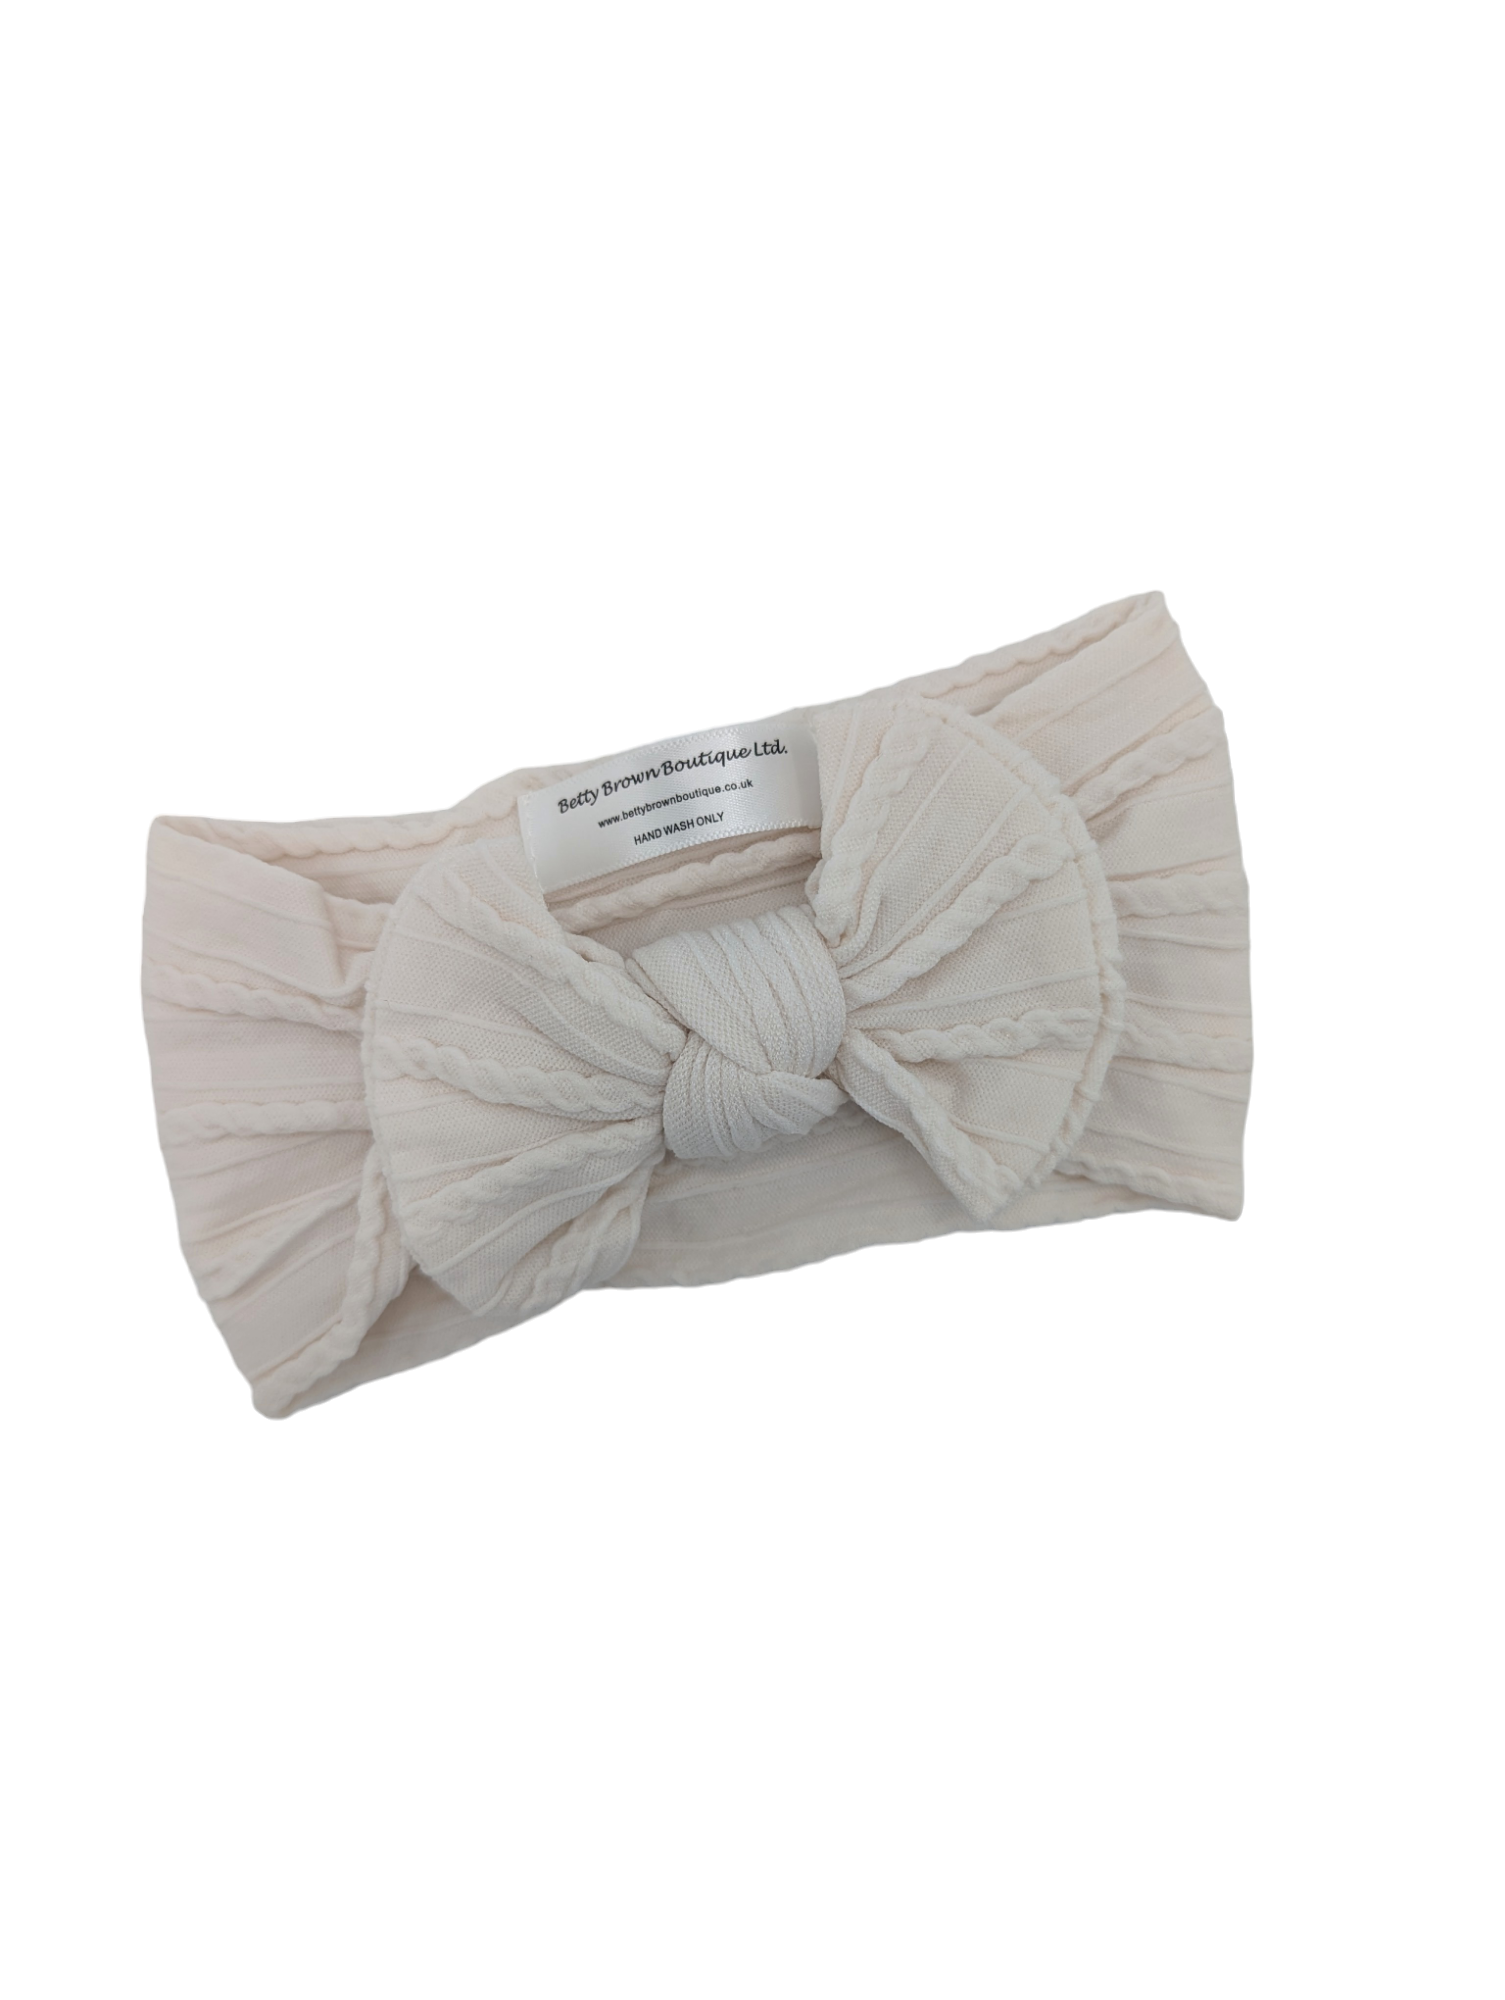 Ivory Smaller Bow Cable Knit Headwrap - Betty Brown Boutique Ltd